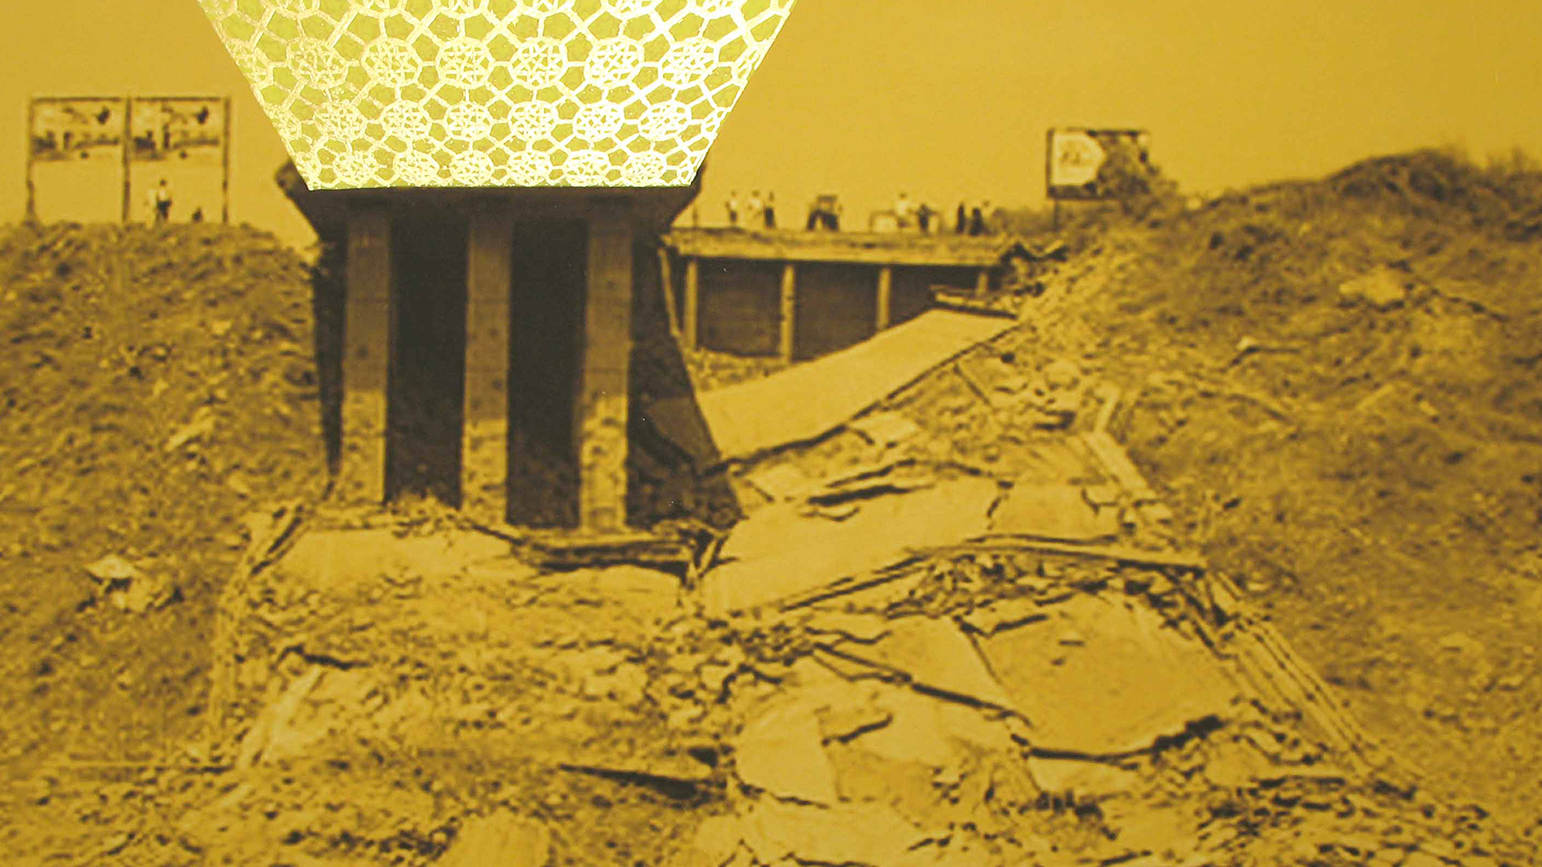 A photograph in yellow and brown tones showing a collapsed bridge. Above the bridge a pattern appears in a truncated upside down pyramid